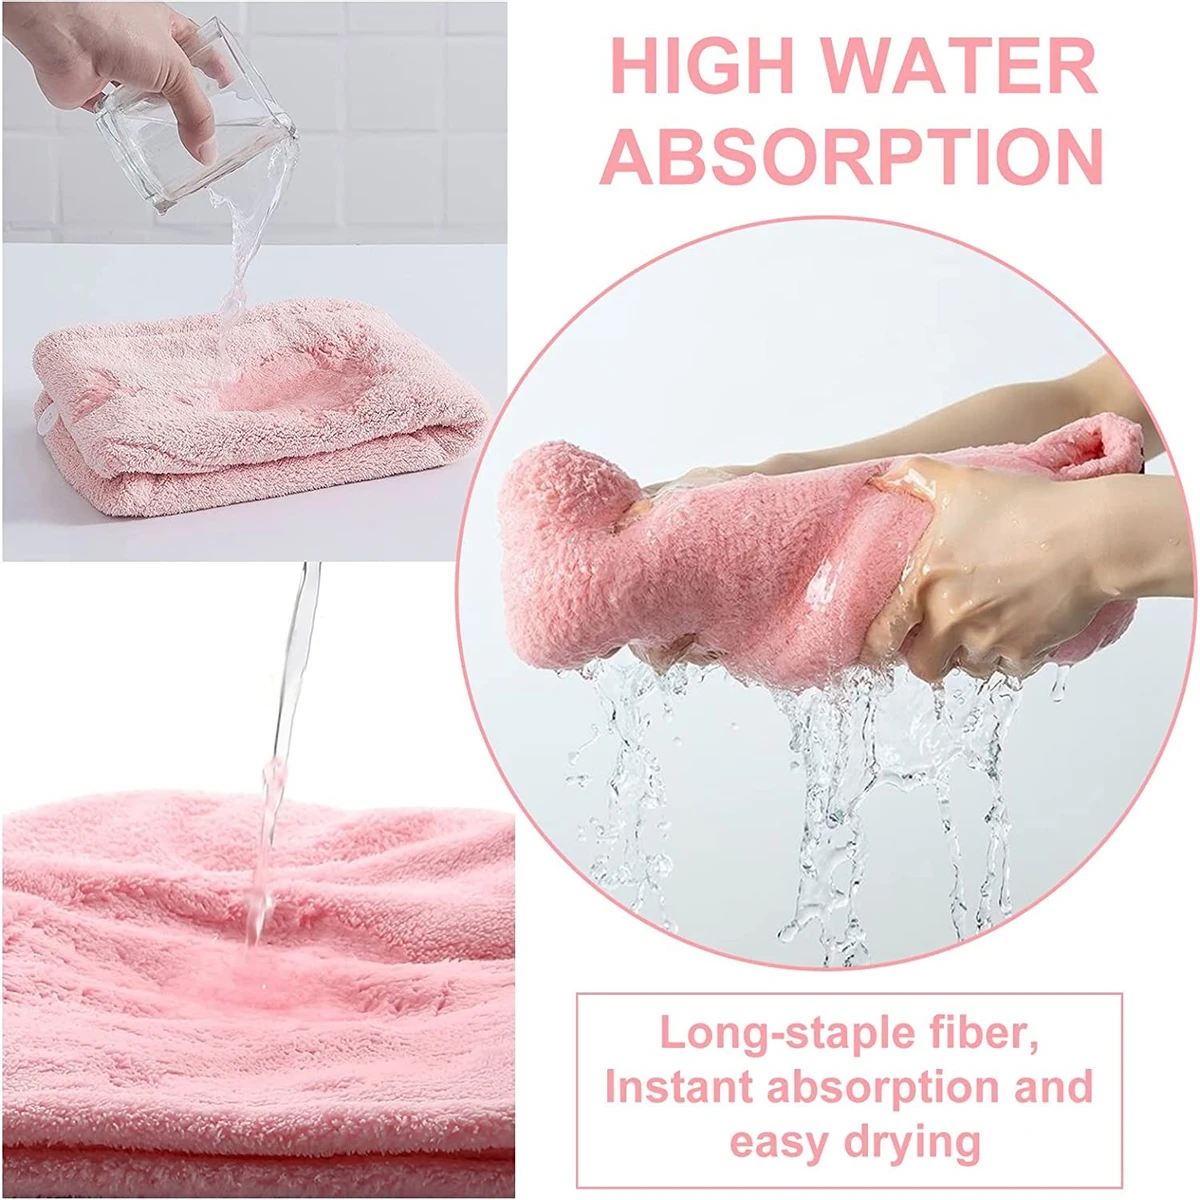 Hair Towel, Hair Drying Towels with Buttons, Super Absorbent Microfiber Hair Towel Dry Hair Quickly for Women Pink